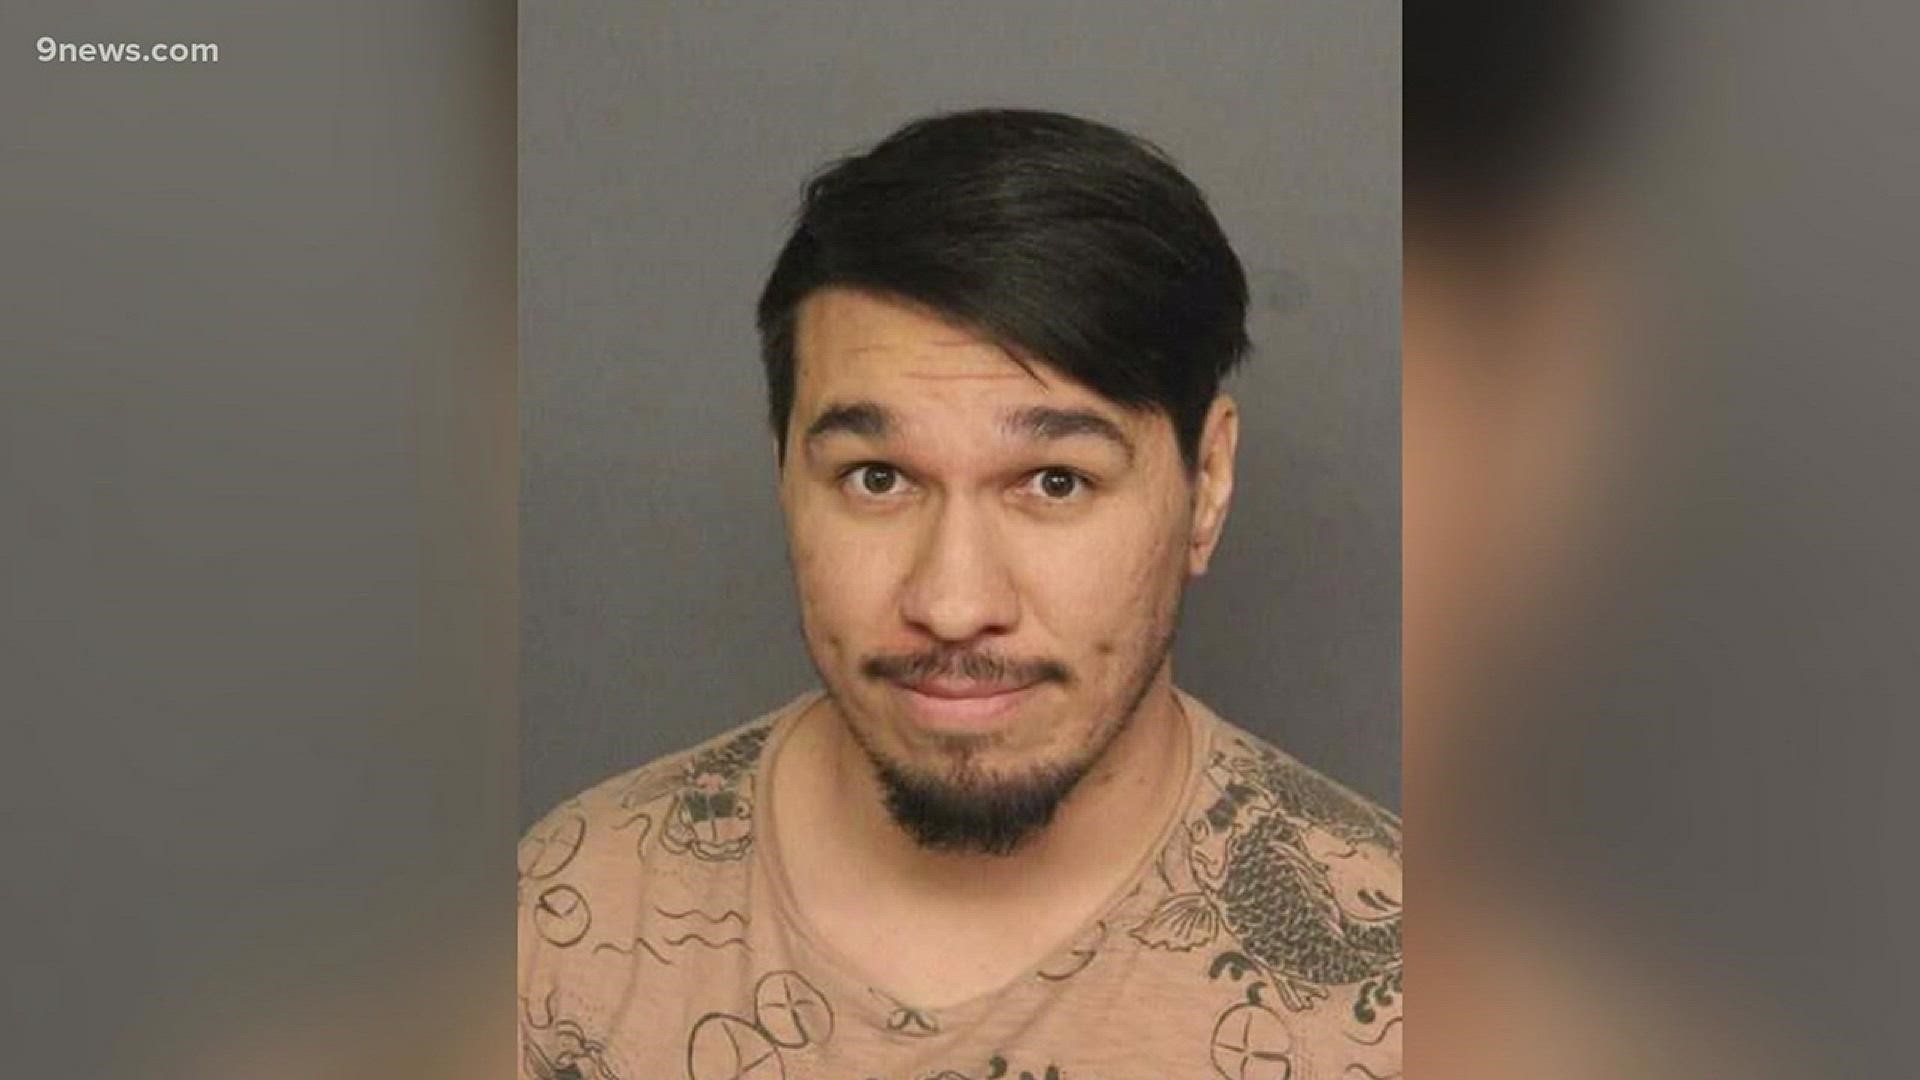 Elias Anthony Dominguez was arrested for second-degree burglary in the Jan. 27 break-in at the Colorado state Capitol, police said.